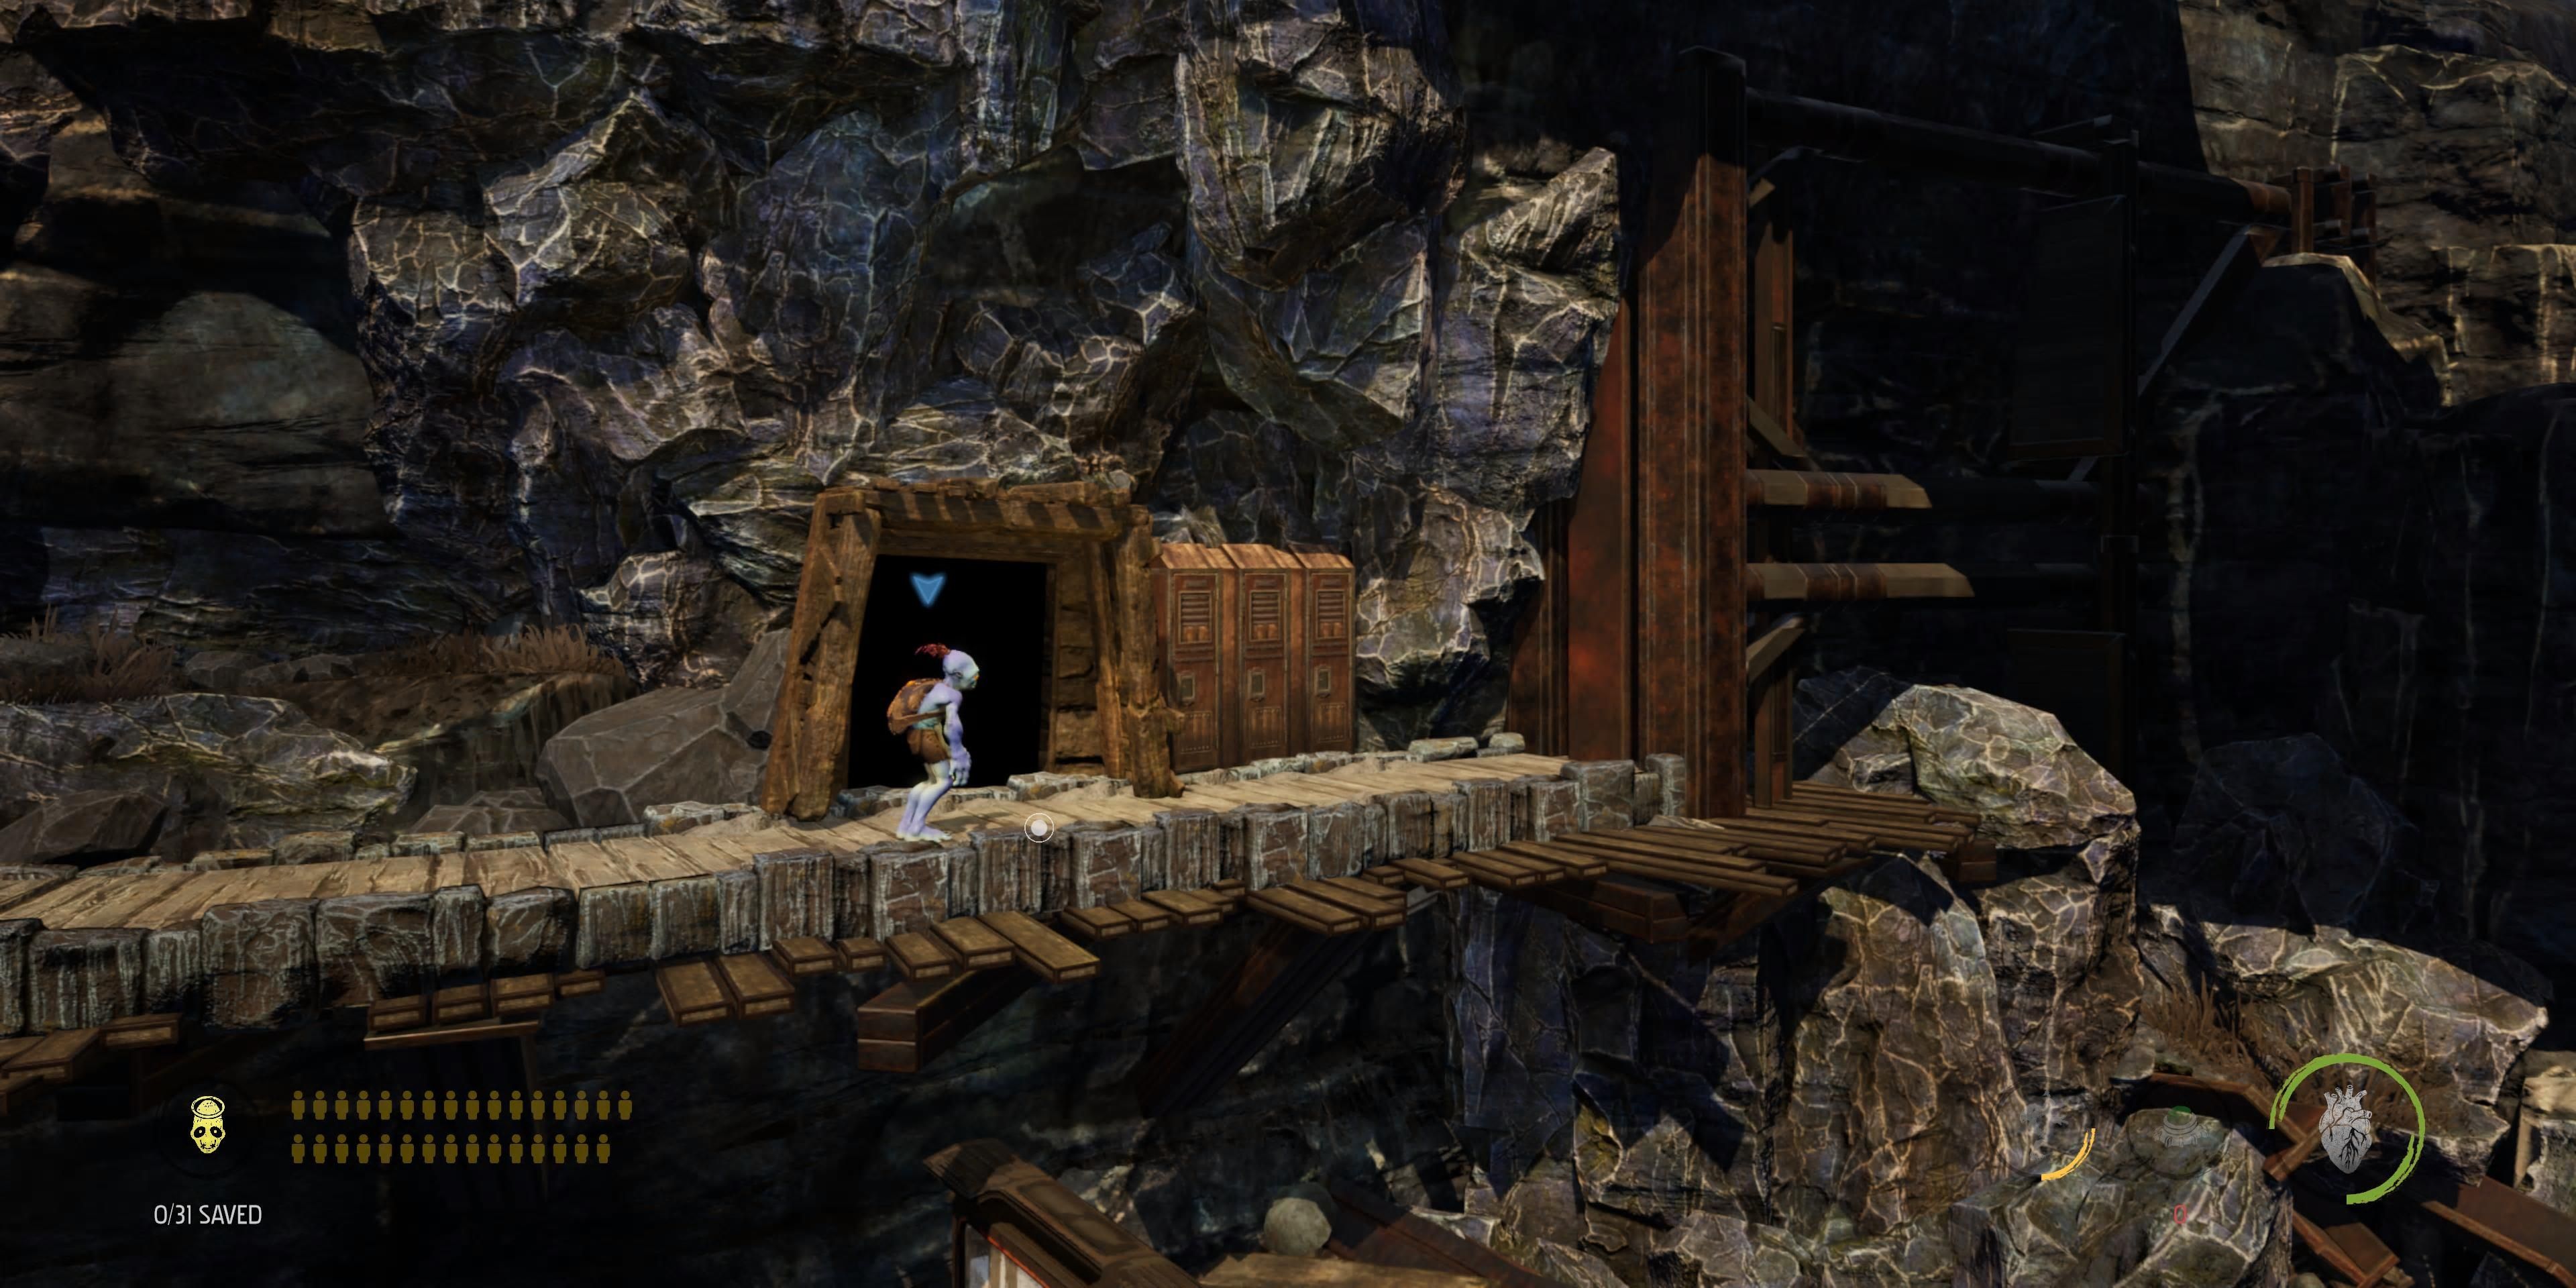 Abe going into a cave entrance in Oddworld Soulstorm